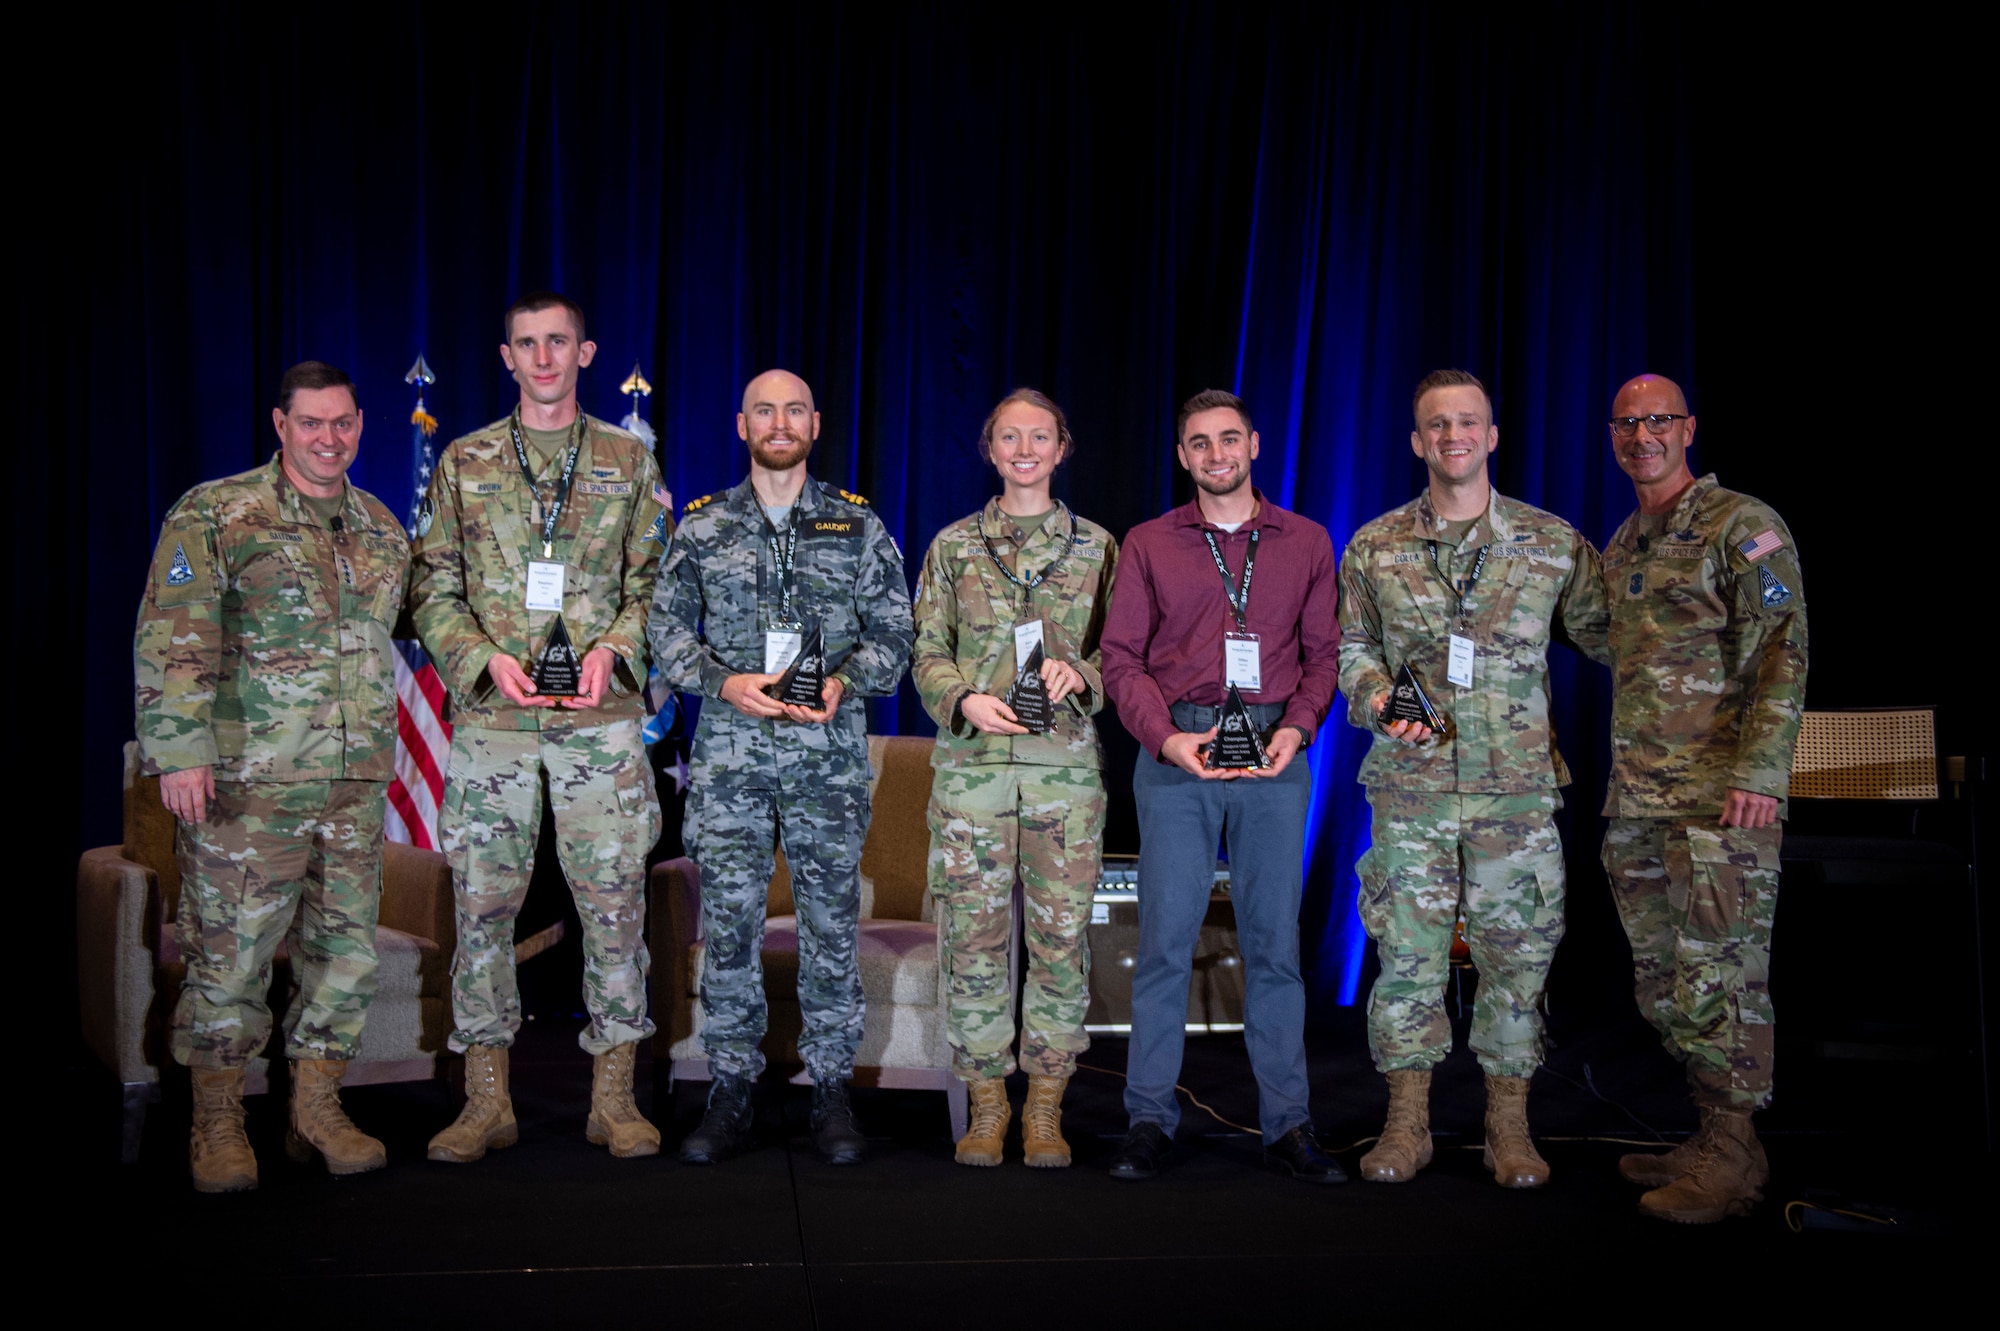 Chief of Space Operations U.S. Space Force Gen. Chance Saltzman and Chief Master Sgt. of the Space Force, Chief John Bentivegna, pose with the Guardian Arena winning team, Team Great Eight from Delta 8, at the Space Force Association Spacepower Conference  in Orlando, Fla., Dec. 12. From left: Saltzman, 1st Lt. Stephen Brown, Royal Australian Navy Lieutenant Angus Gaudry,  1st Lt. Sara Burton, Dillan Paschall, Capt. Alexander Colla and Bentivegna. (U.S. Air Force photo by Staff Sgt. Adam Shanks)